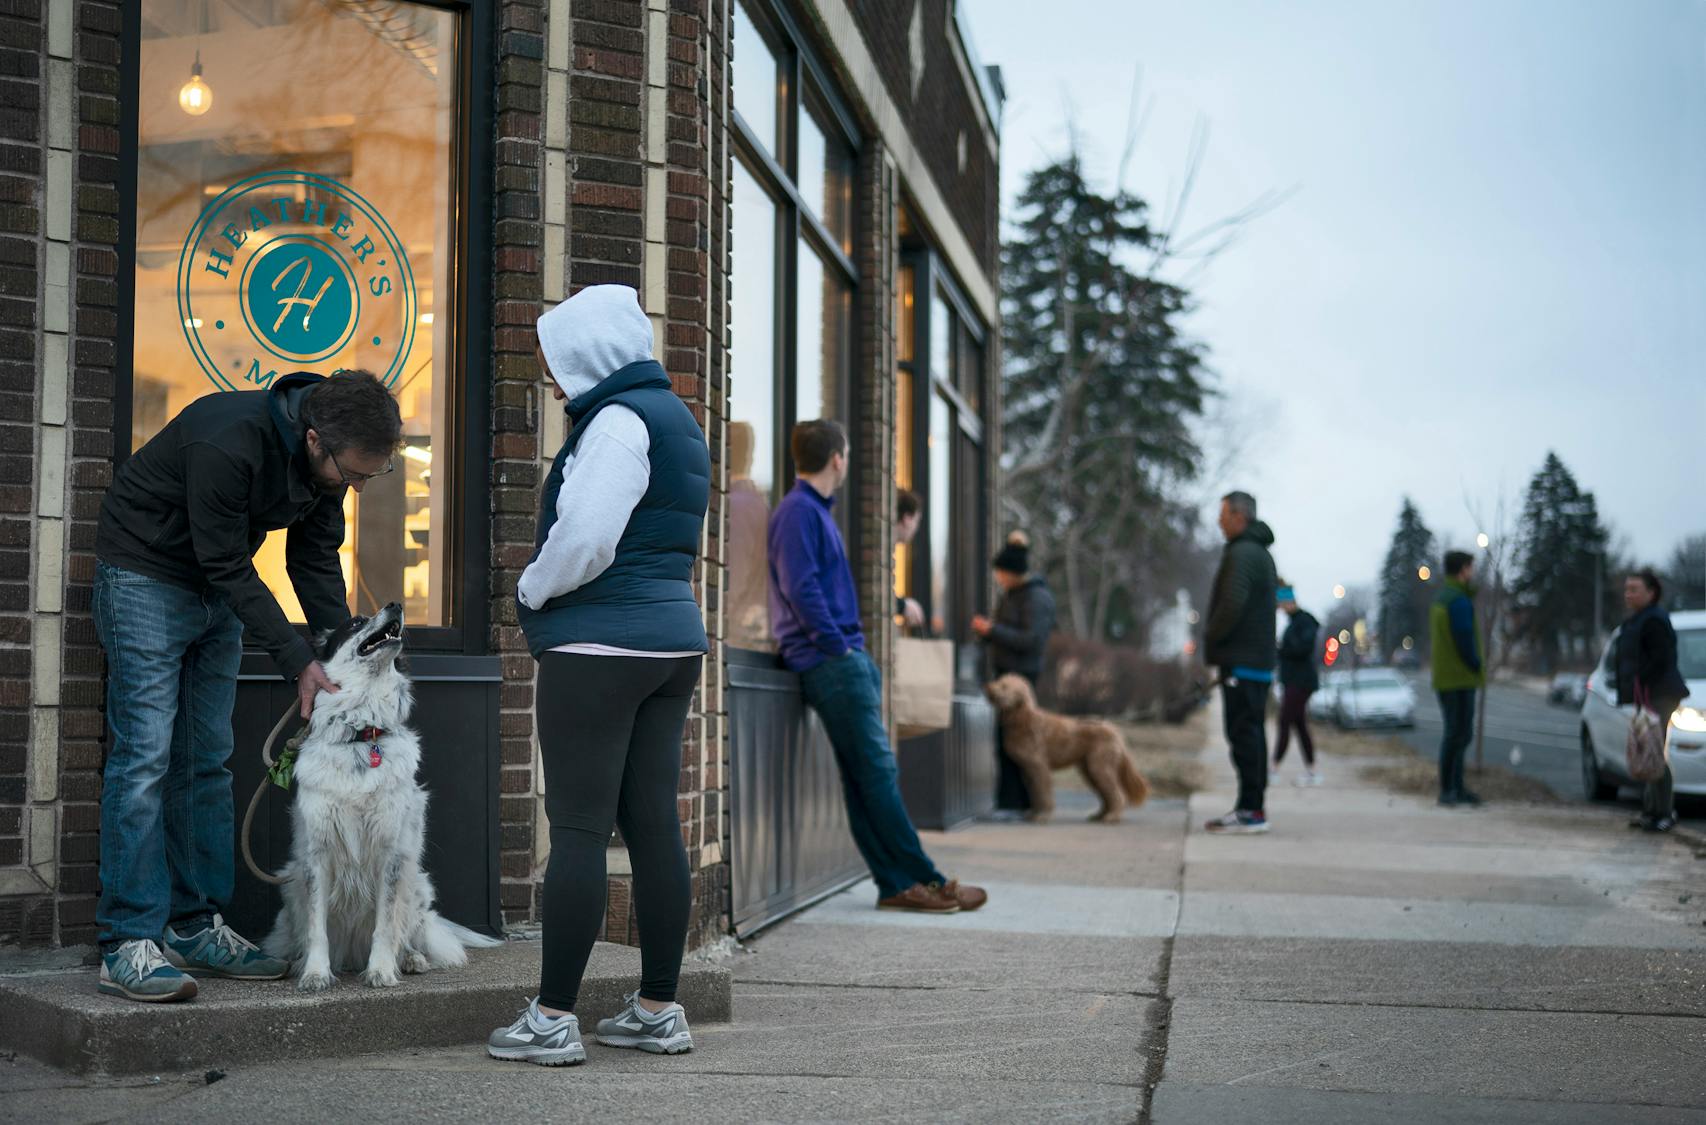 Customers waited for takeout orders outside Heather's restaurant in south Minneapolis.